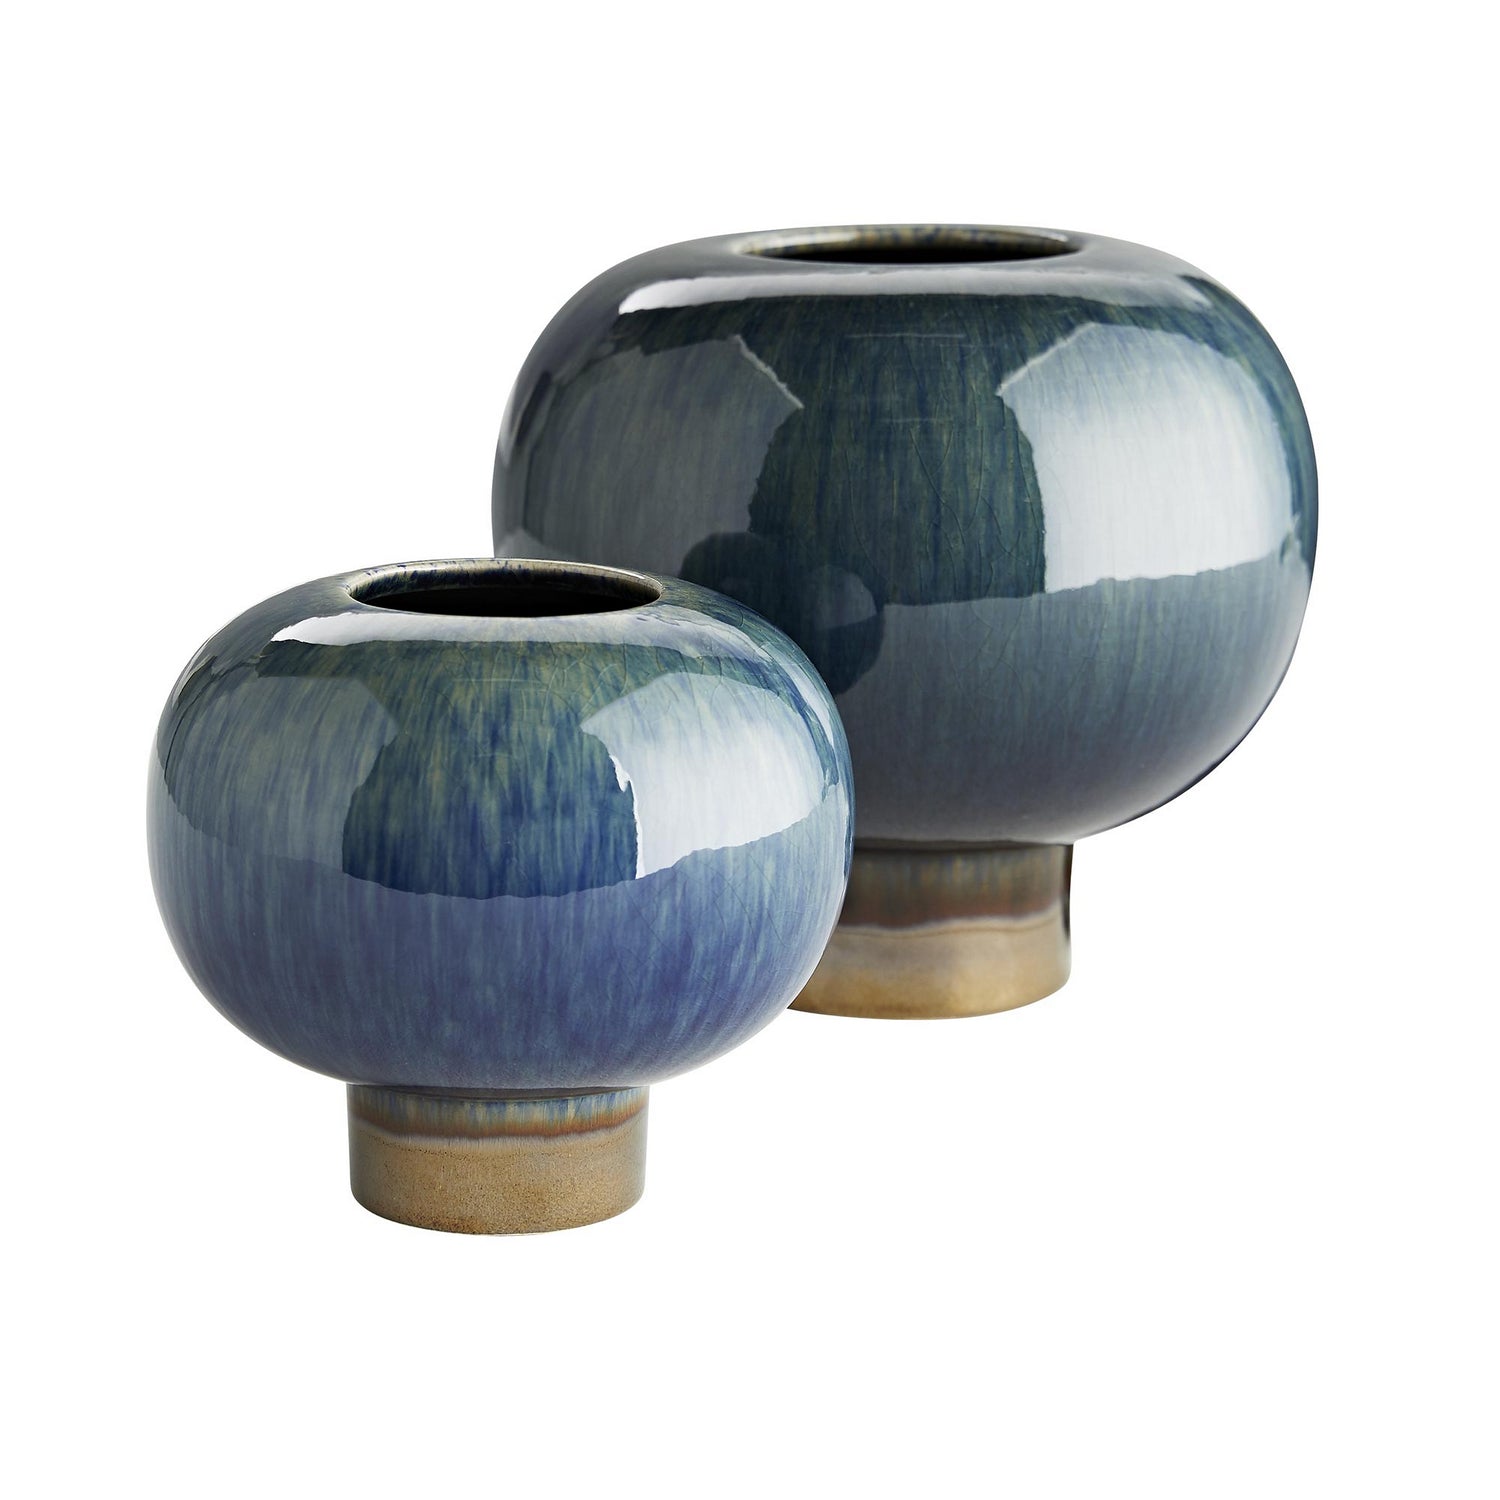 Vases Set of 2 from the Tuttle collection in Peacock ad Bronze Reactive finish